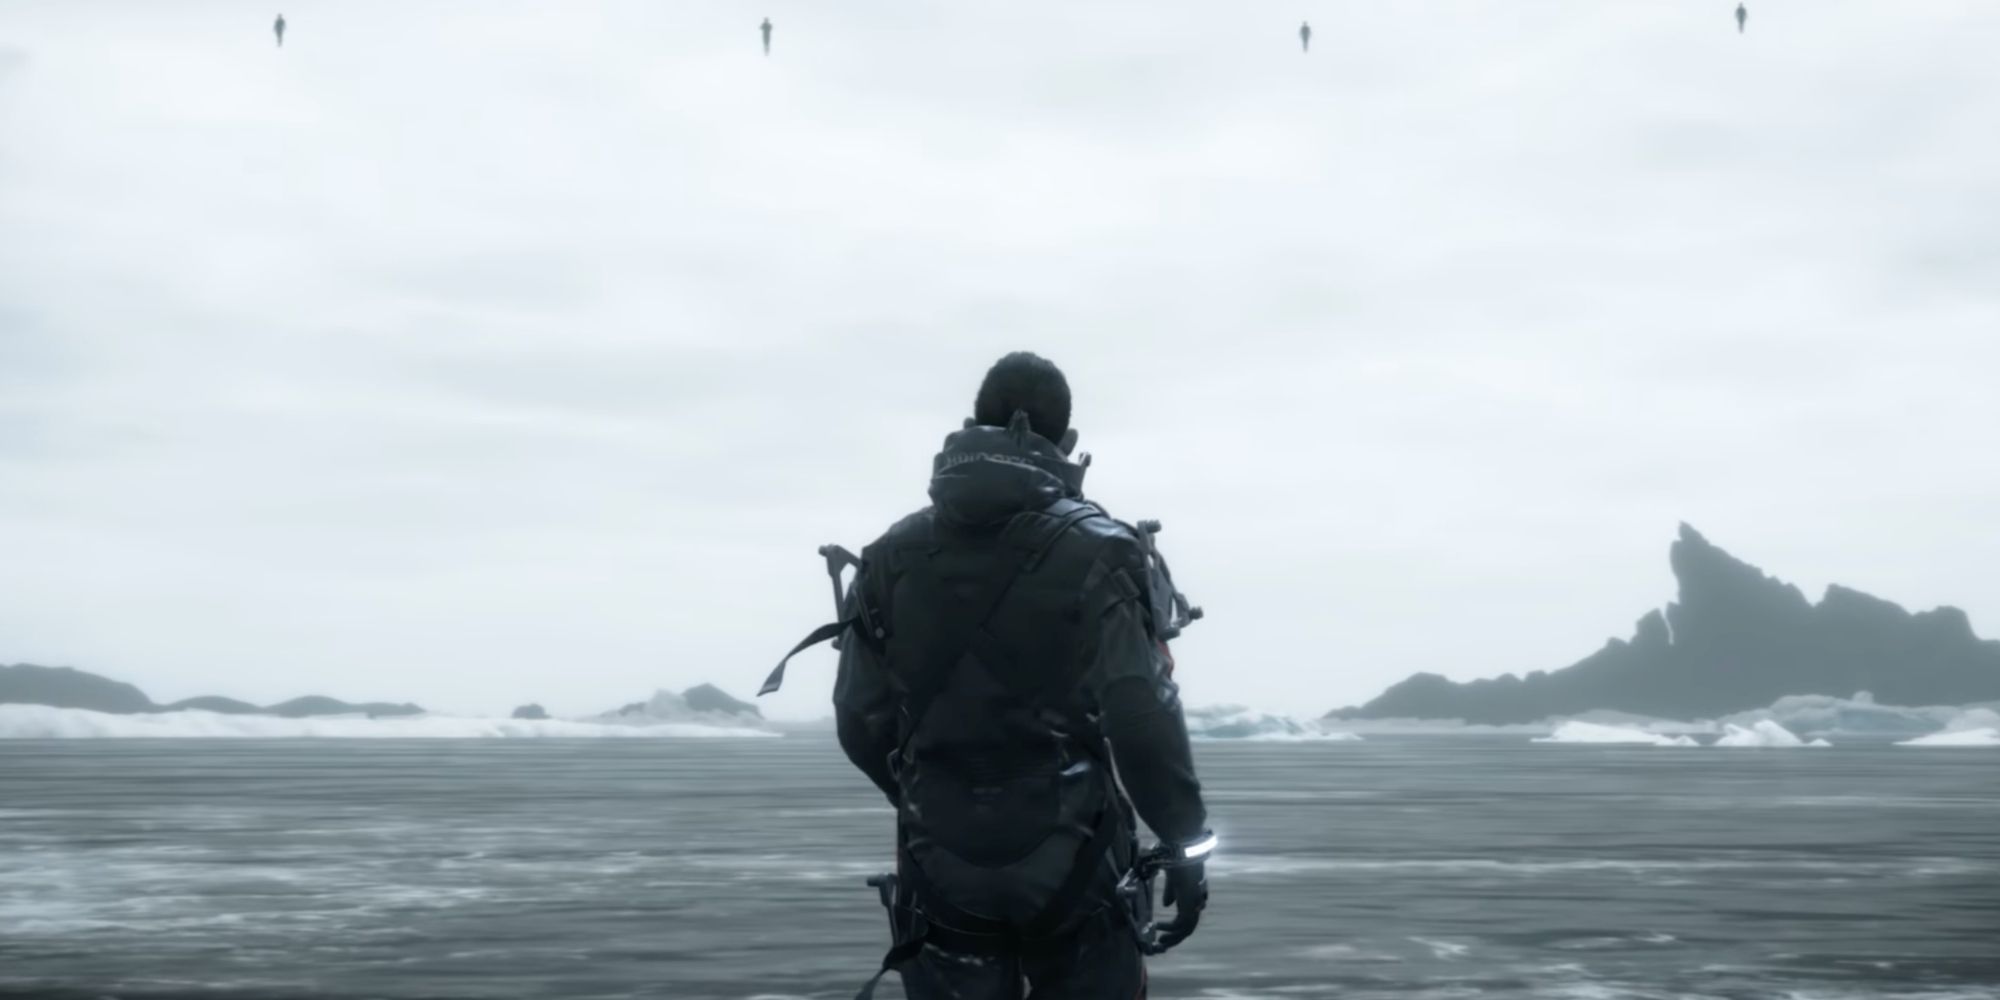 Sam from Death Stranding Staring at Four Floating Figures